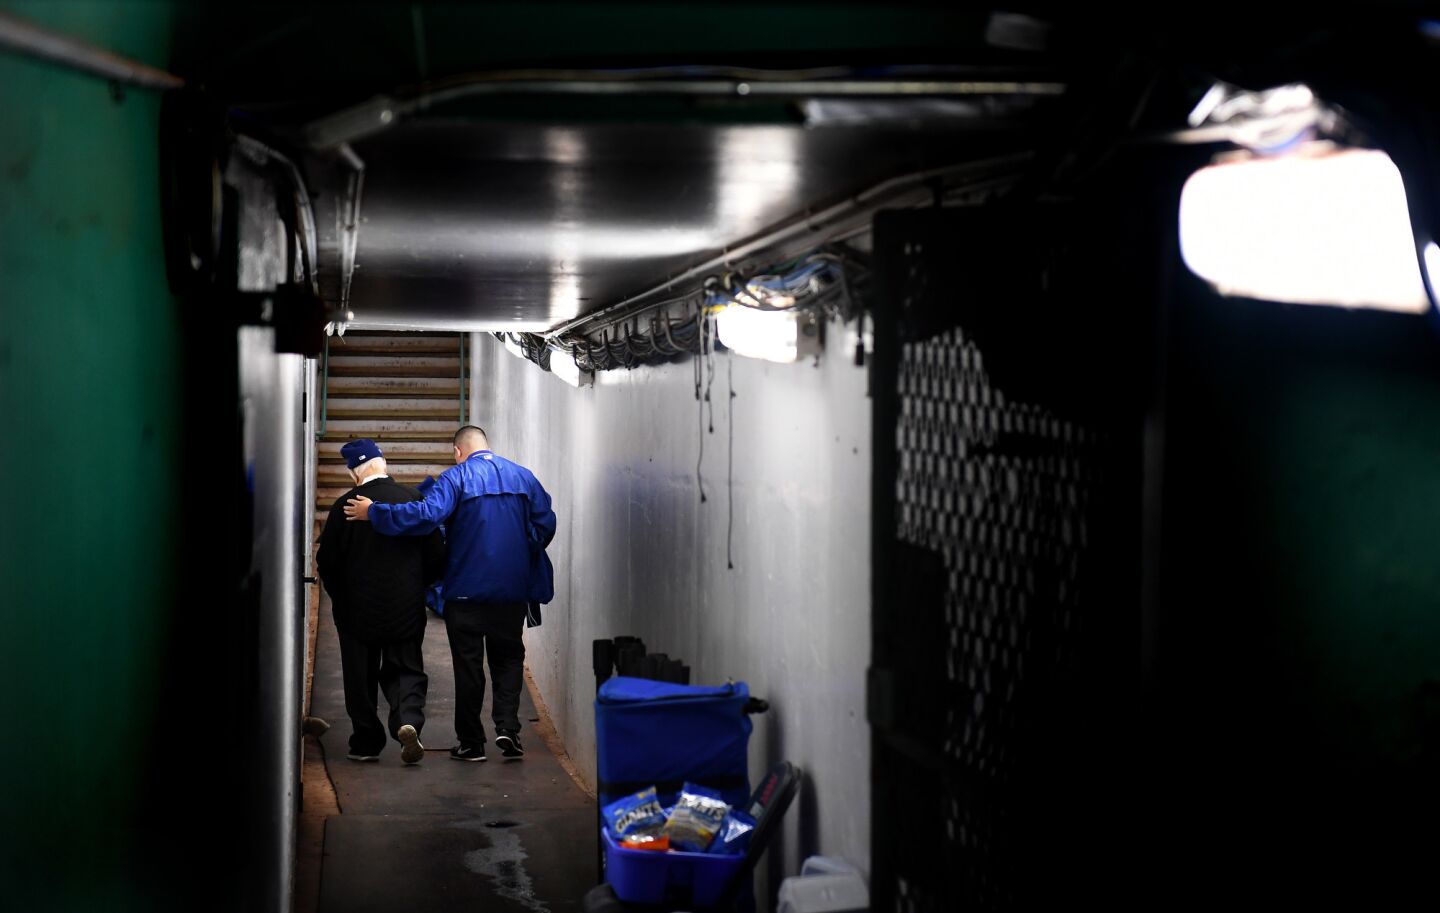 Dodgers Tommy Lasorda walks through a tunnel with caretaker Felipe Ruiz during a Dodger work out at Fenway Park in Boston.